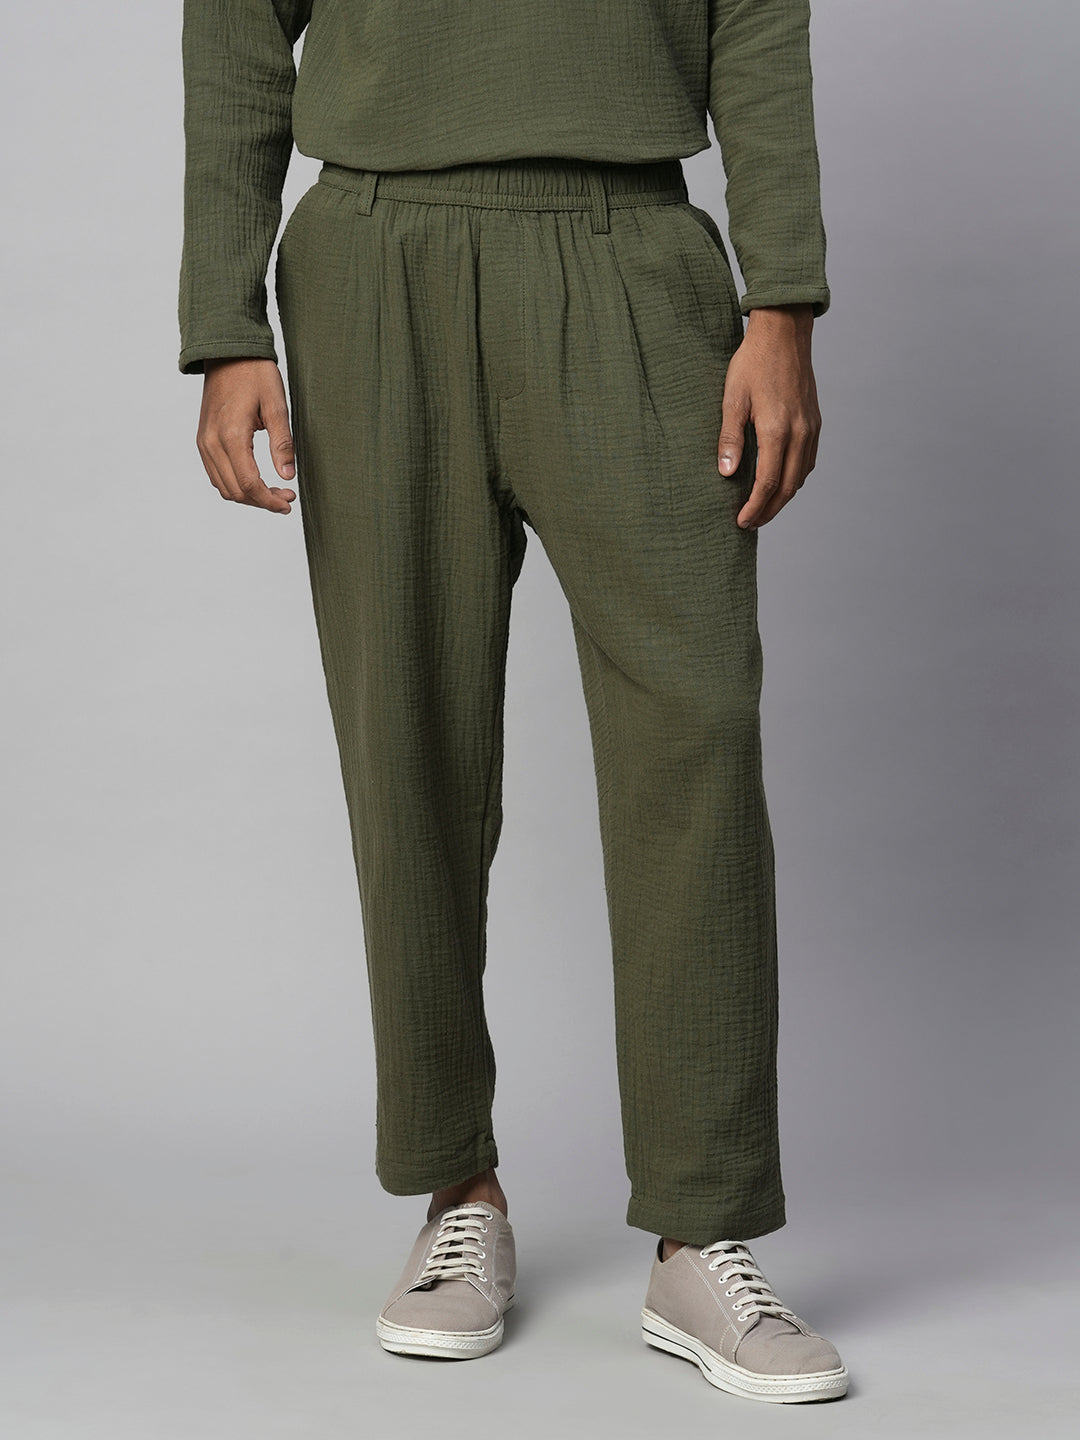 Buy Cargo Trousers & Loose Fit Cargo Pants For Men - Apella